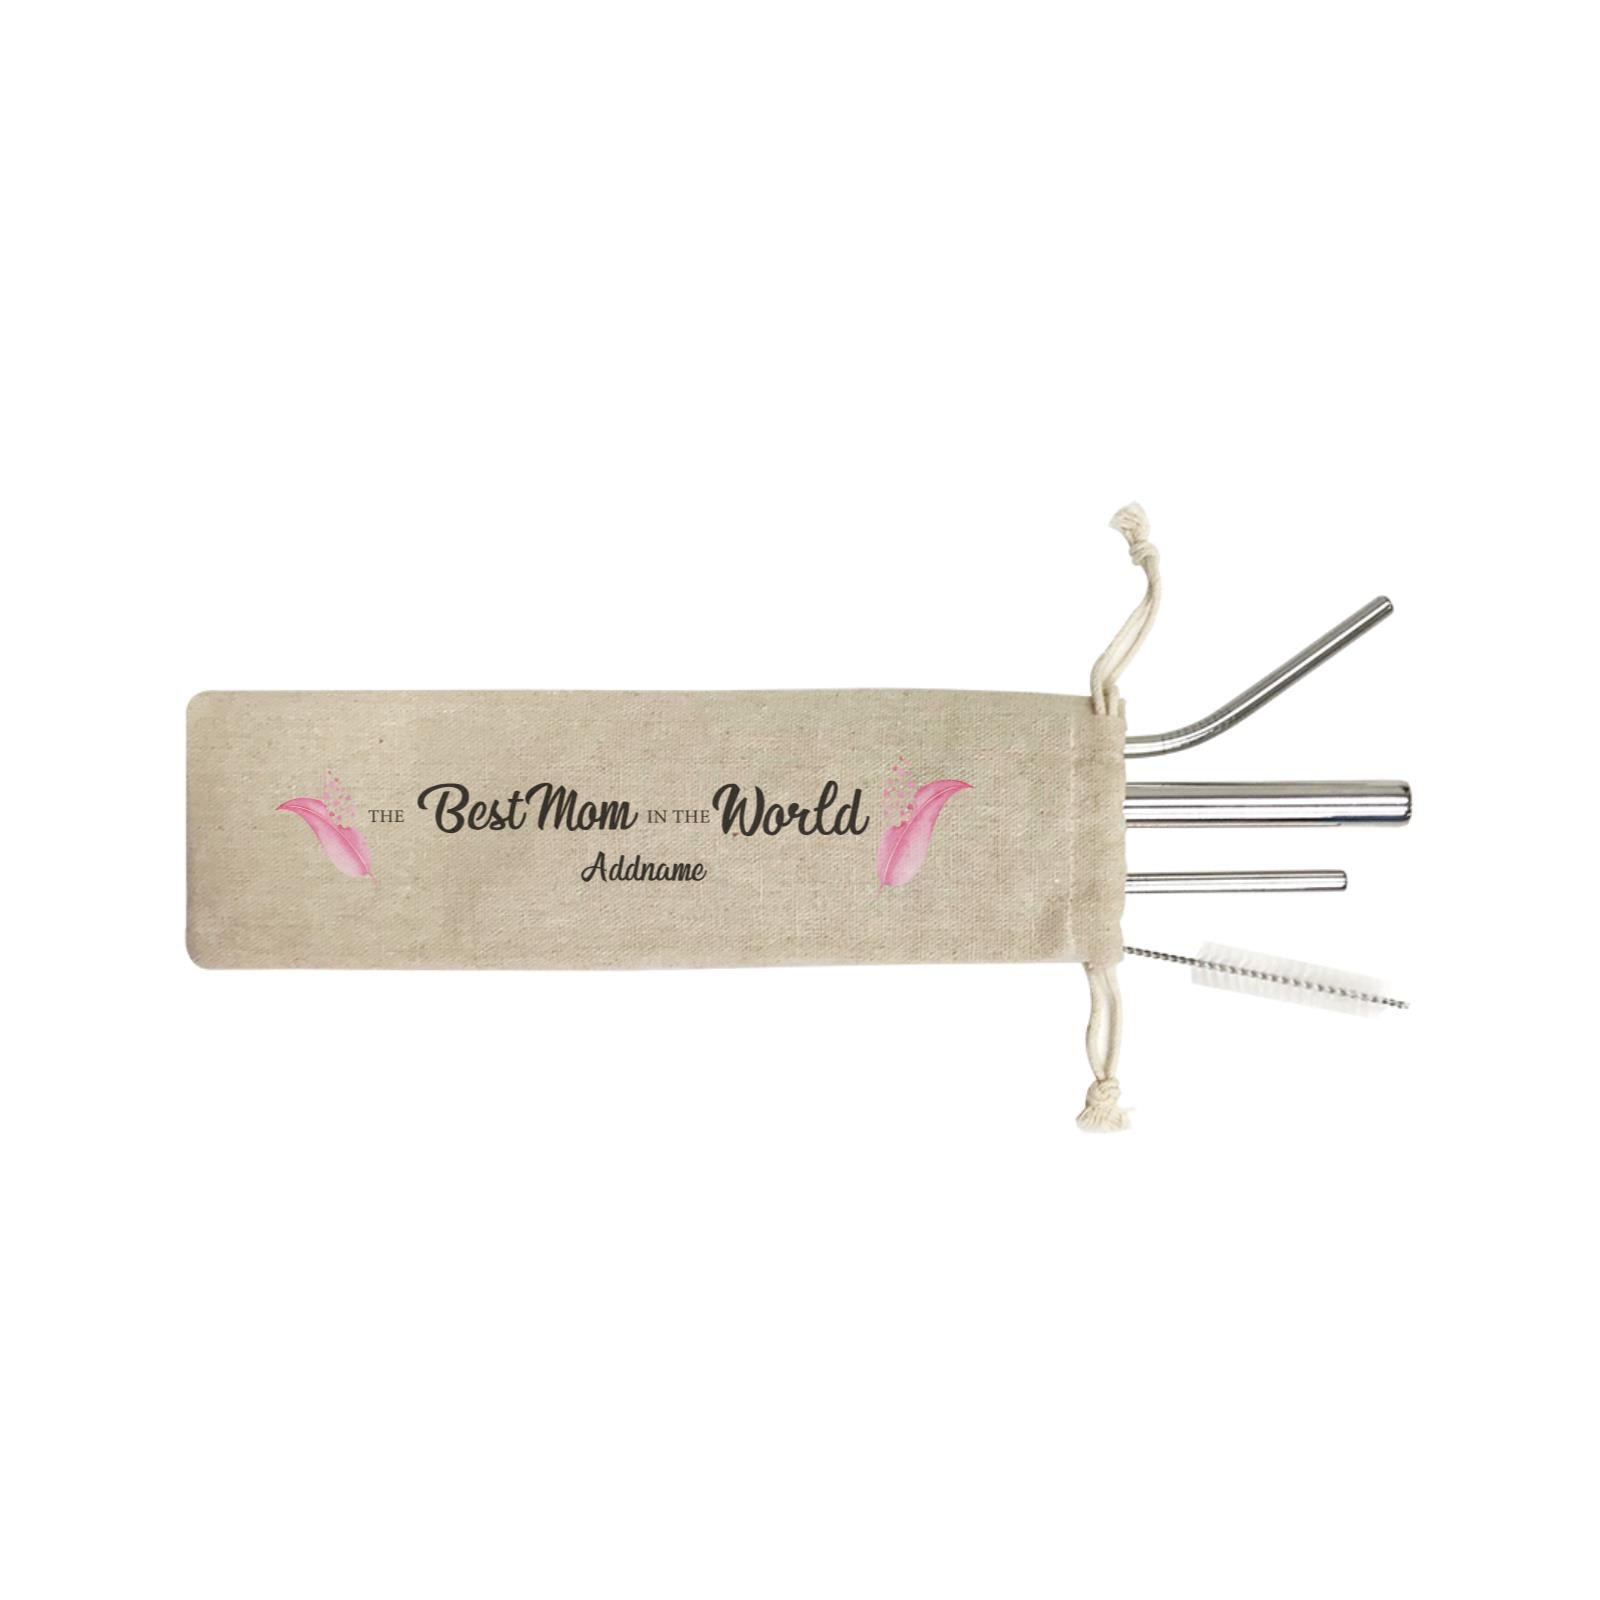 Sweet Mom Quotes 1 Love Feathers The Best Mom In The World Addname SB 4-In-1 Stainless Steel Straw Set in Satchel